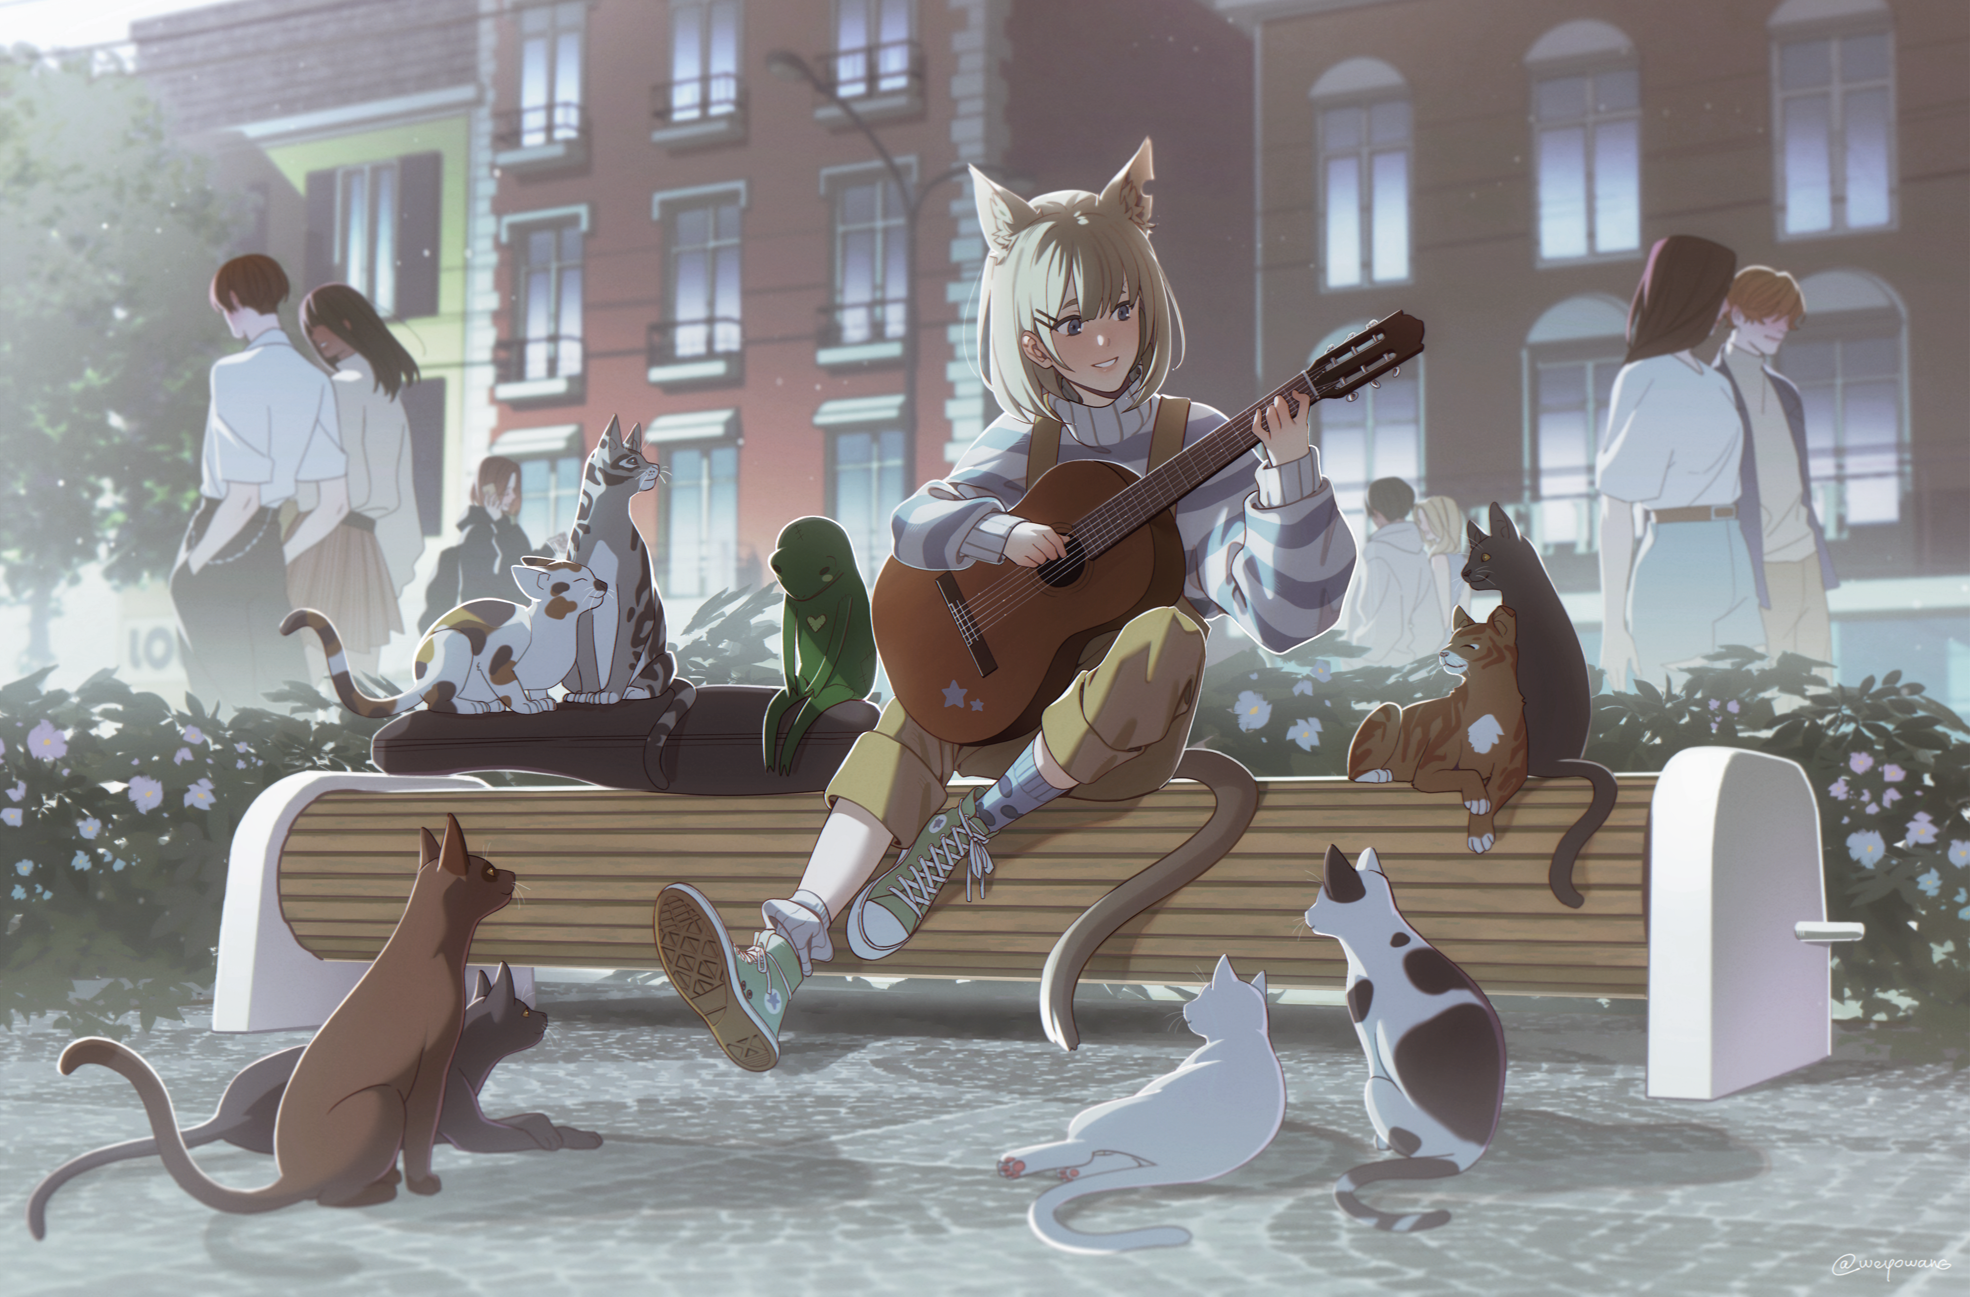 Cat Girl Playing The Guitar With Her Cat Friends by weyowang